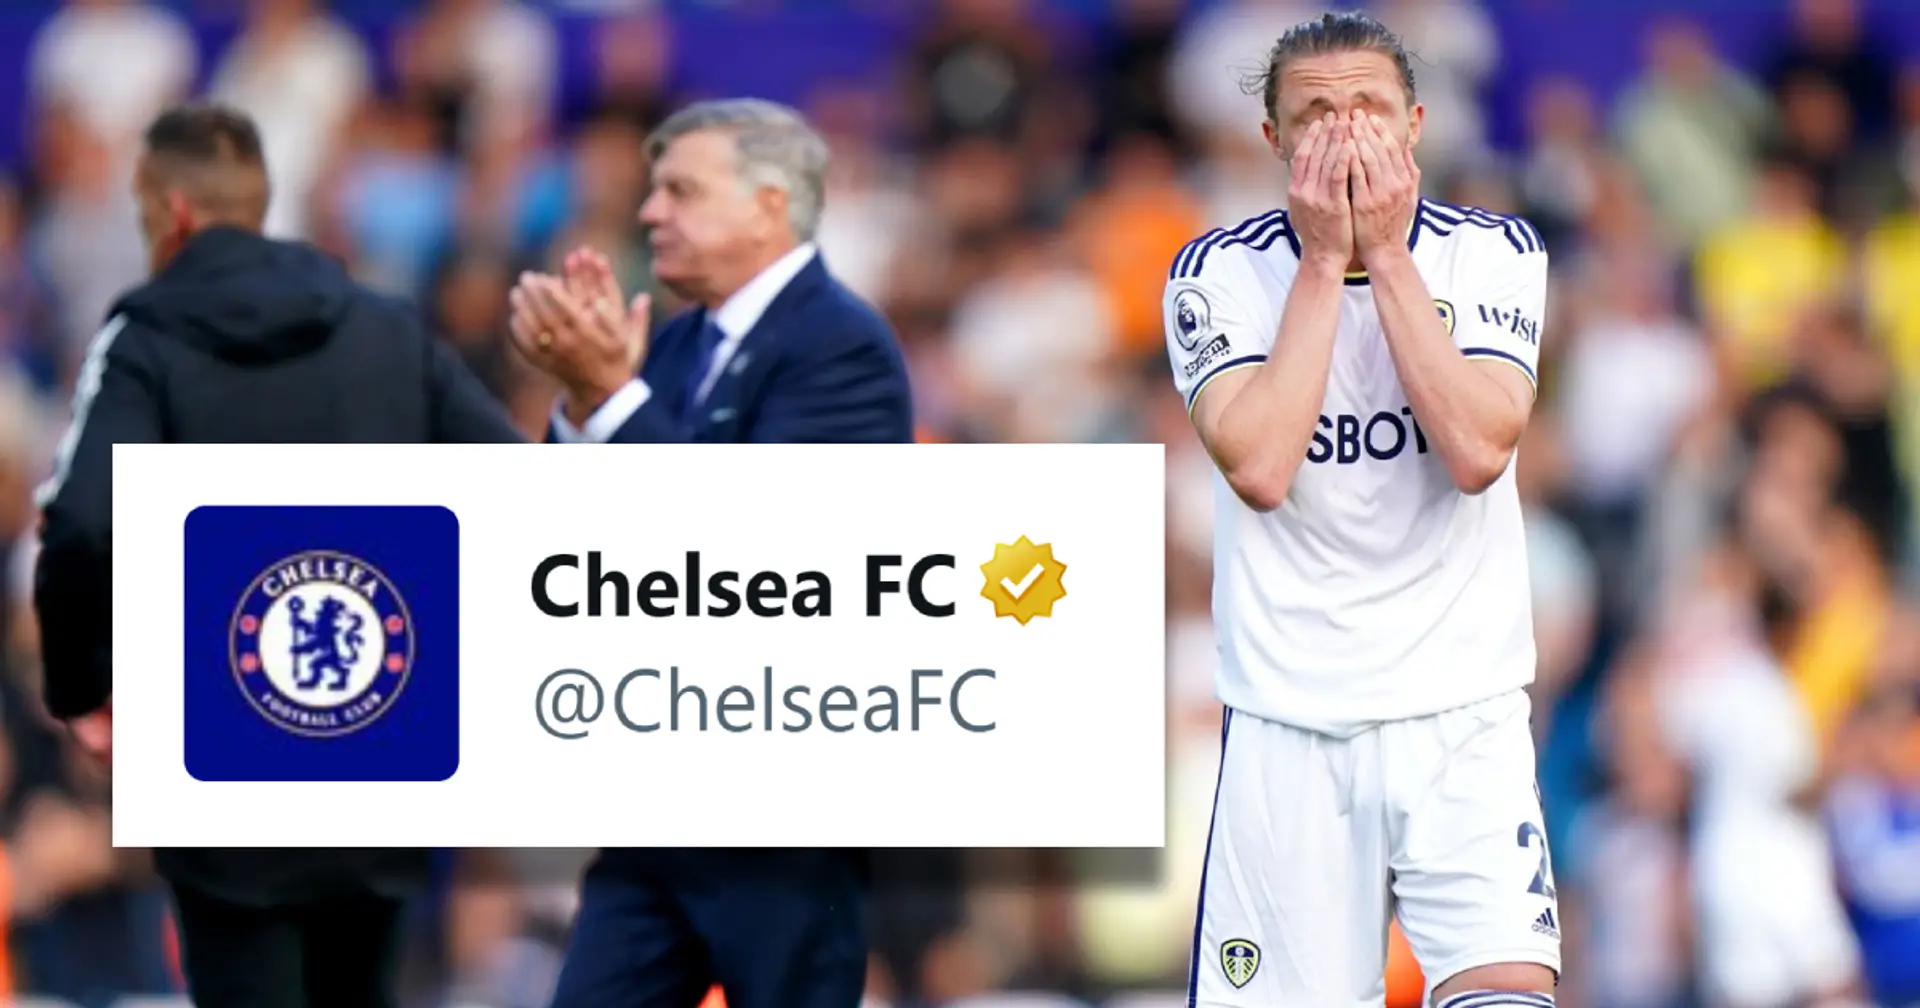 'It certainly does': Chelsea's official Twitter account takes savage dig at Leeds after relegation